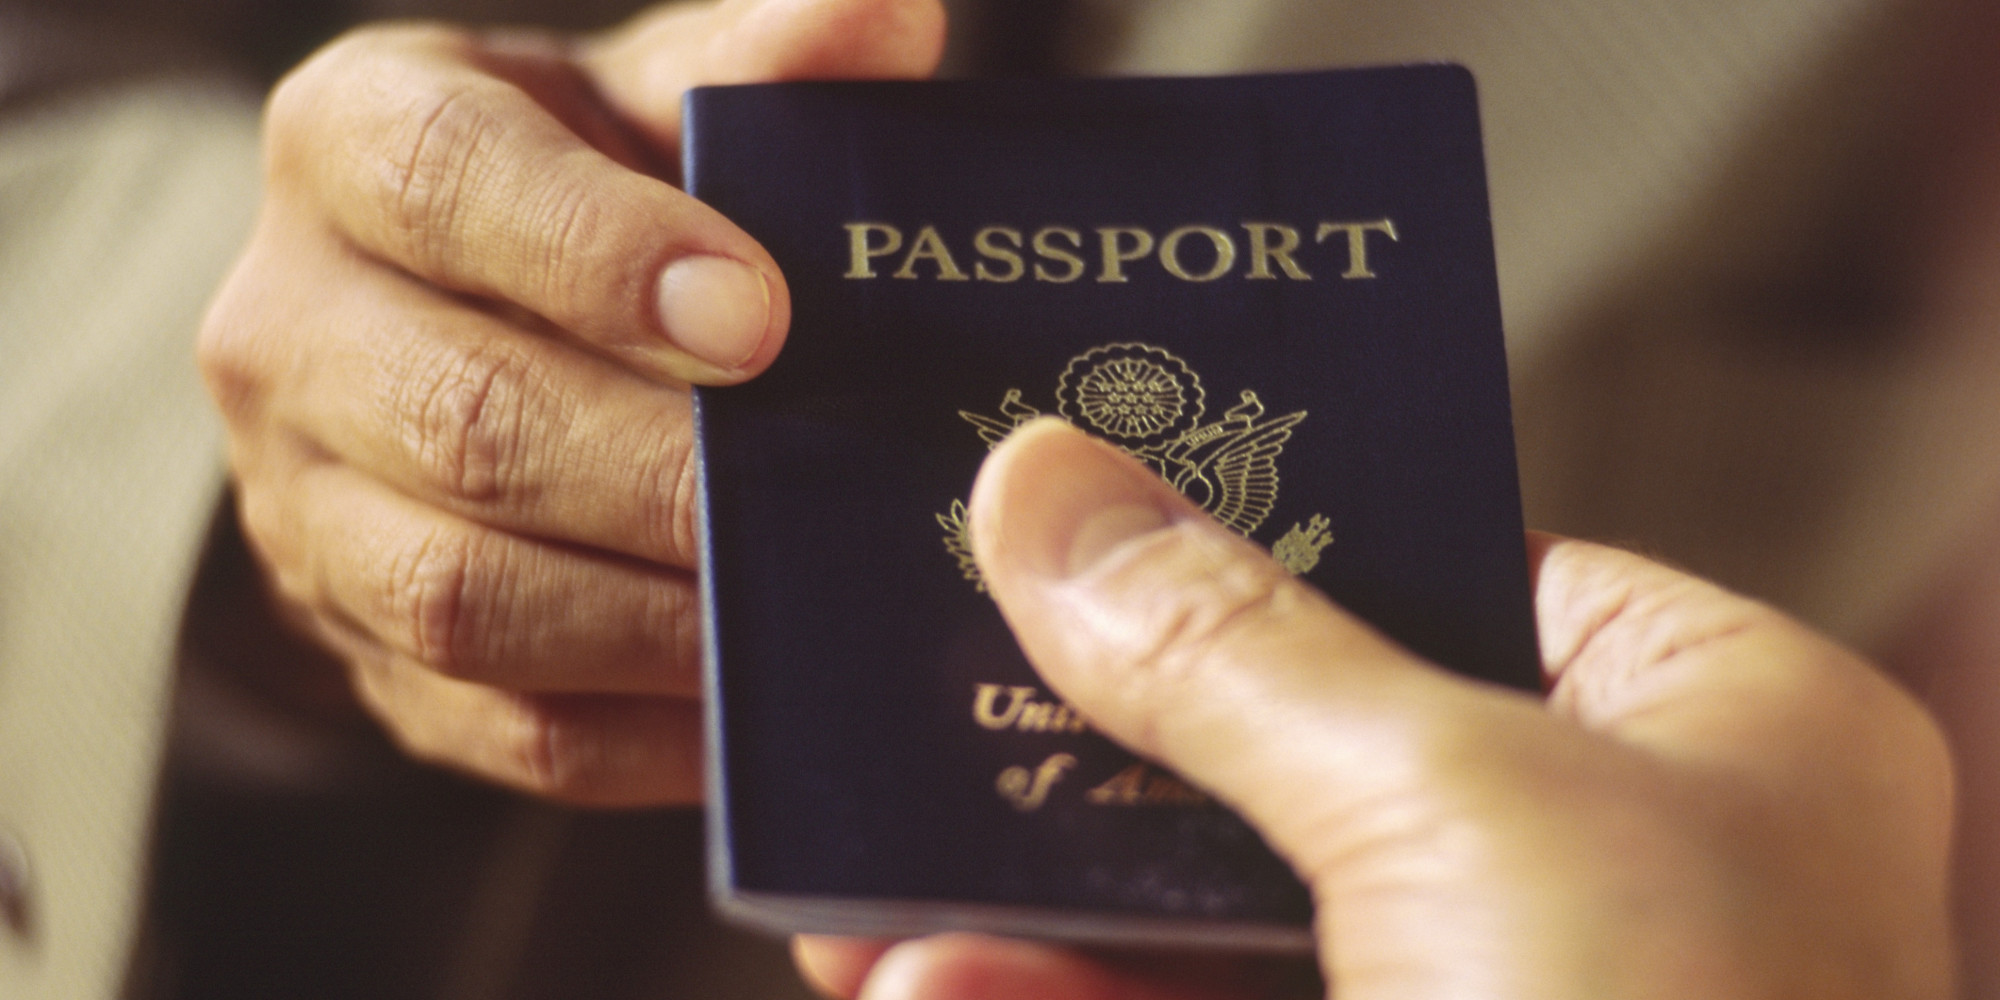 Here's How To Get A Passport Fast, And No It's Not From A Shady Company